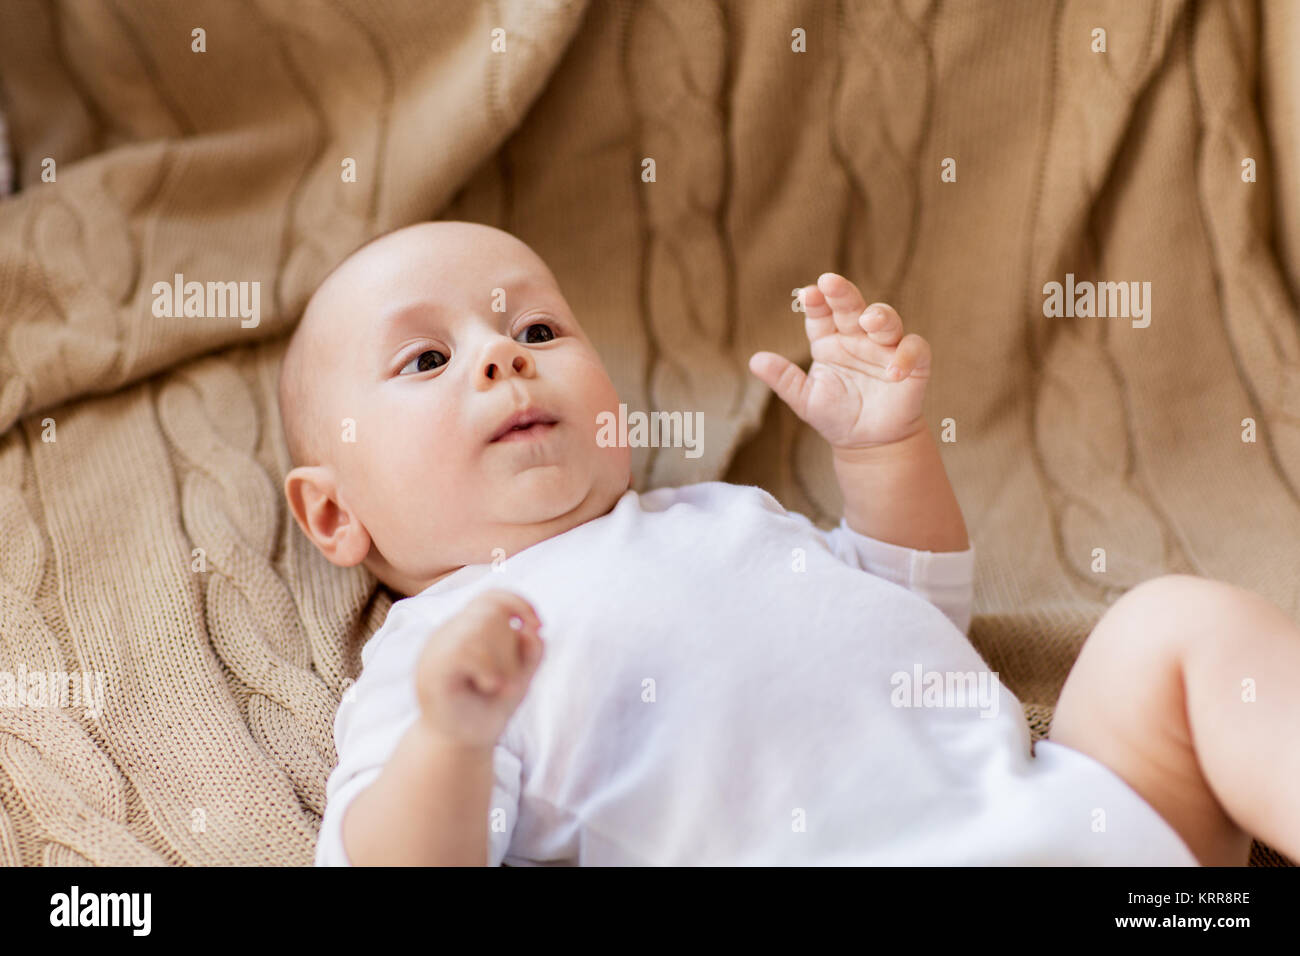 Sweet Little baby boy lying on blanket tricoté Banque D'Images